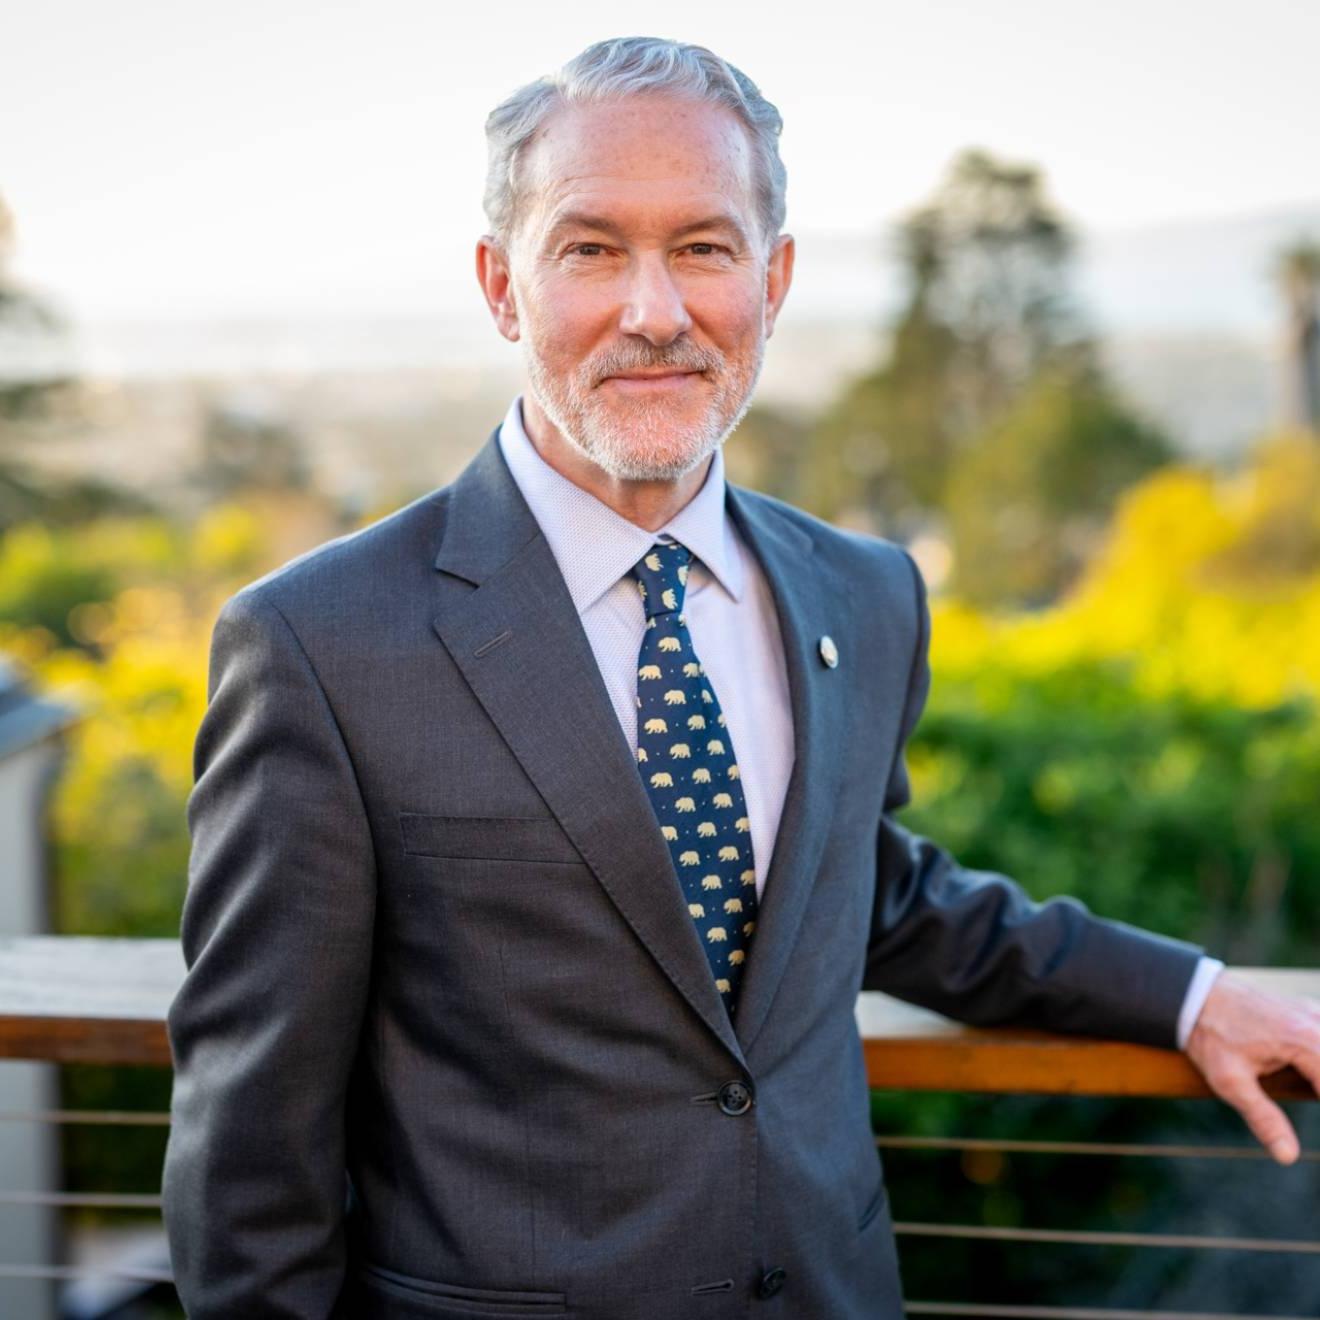 Rich Lyons, 一个白头发白胡子的白人, smiling in a suit with a Berkeley bears tie, on campus